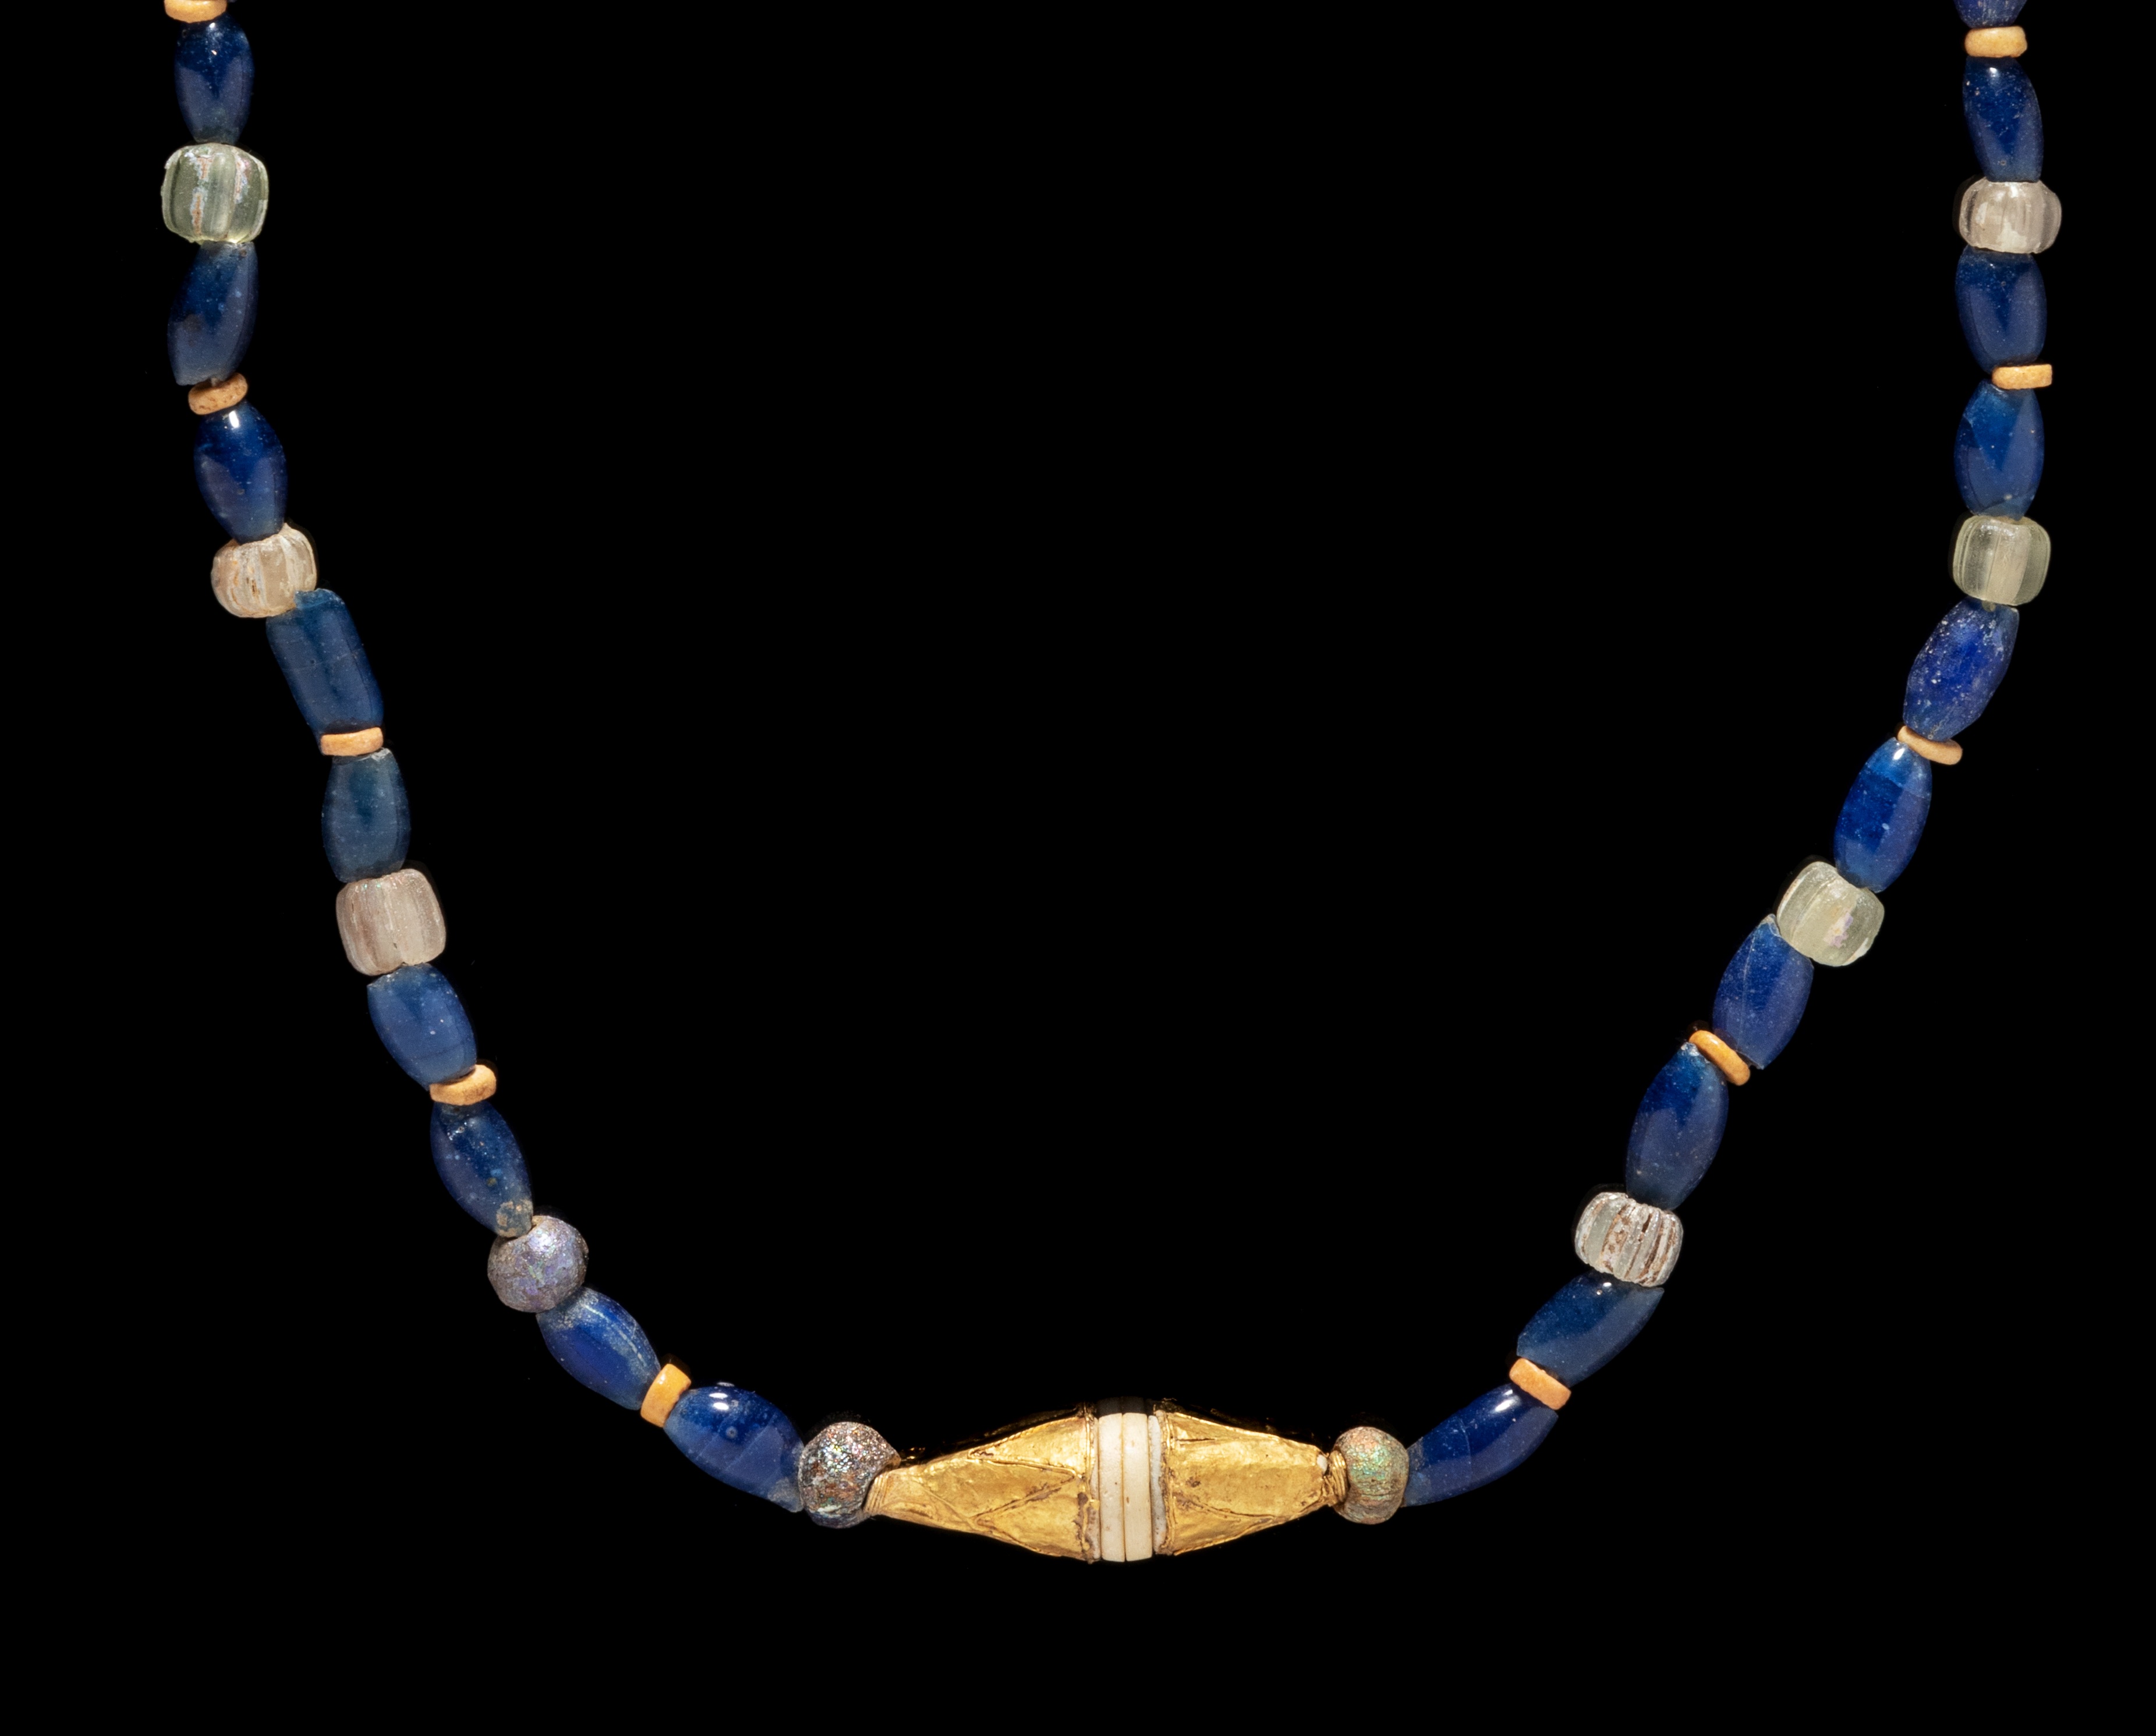 A Roman Gold and Glass Bead Necklace  Length 19 13/16 inches (25 cm). - Image 5 of 6